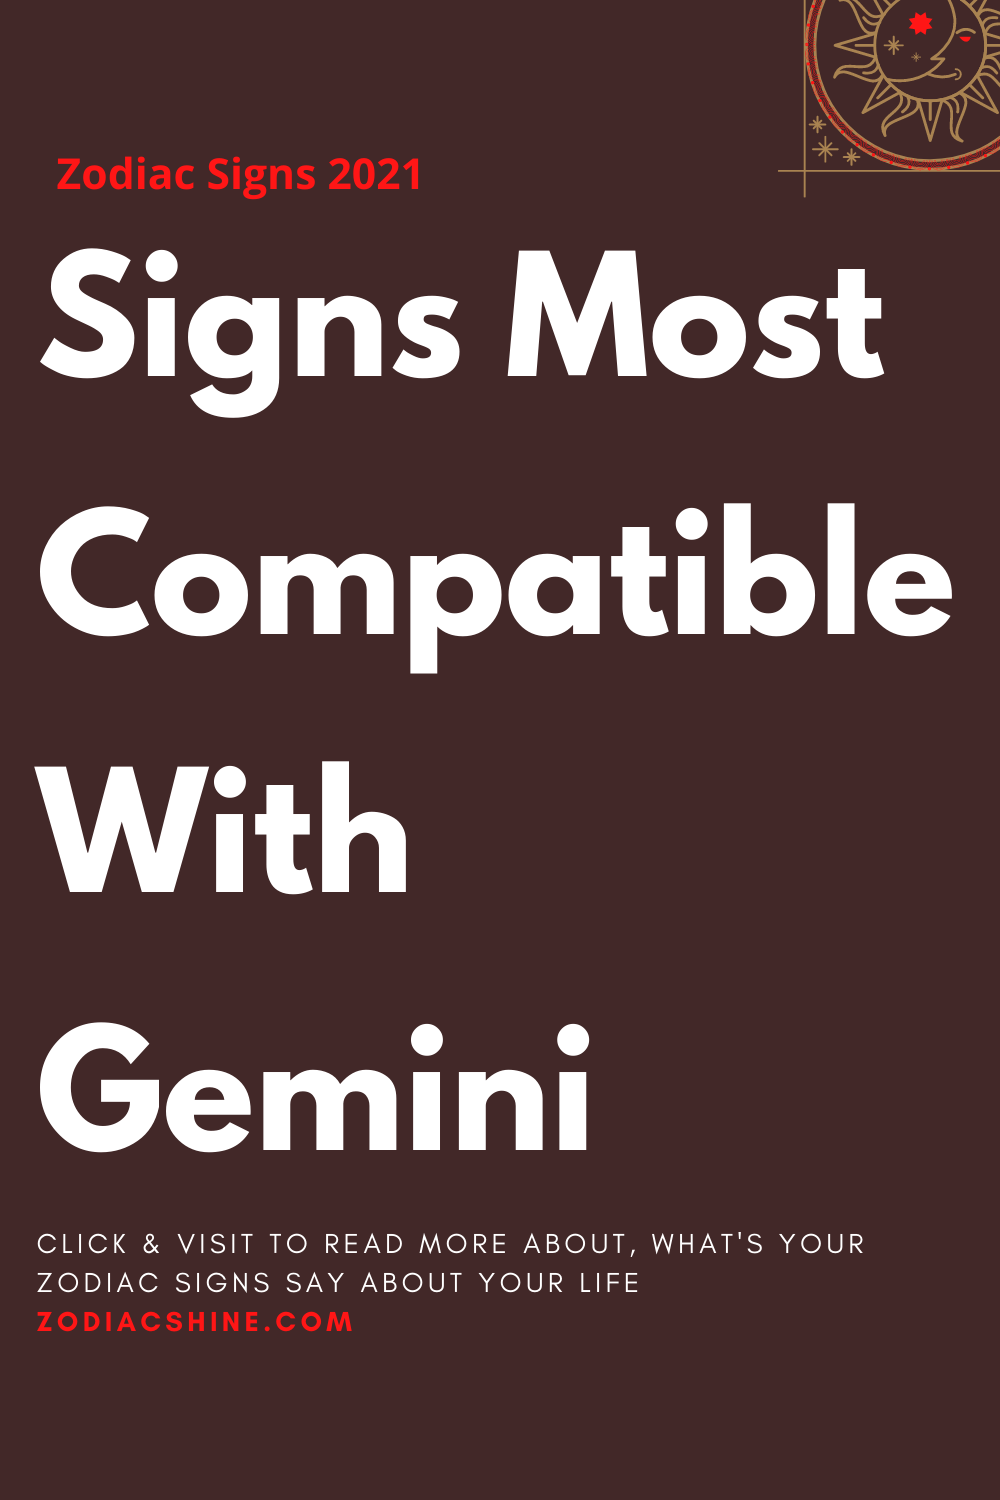 Signs Most Compatible With Gemini